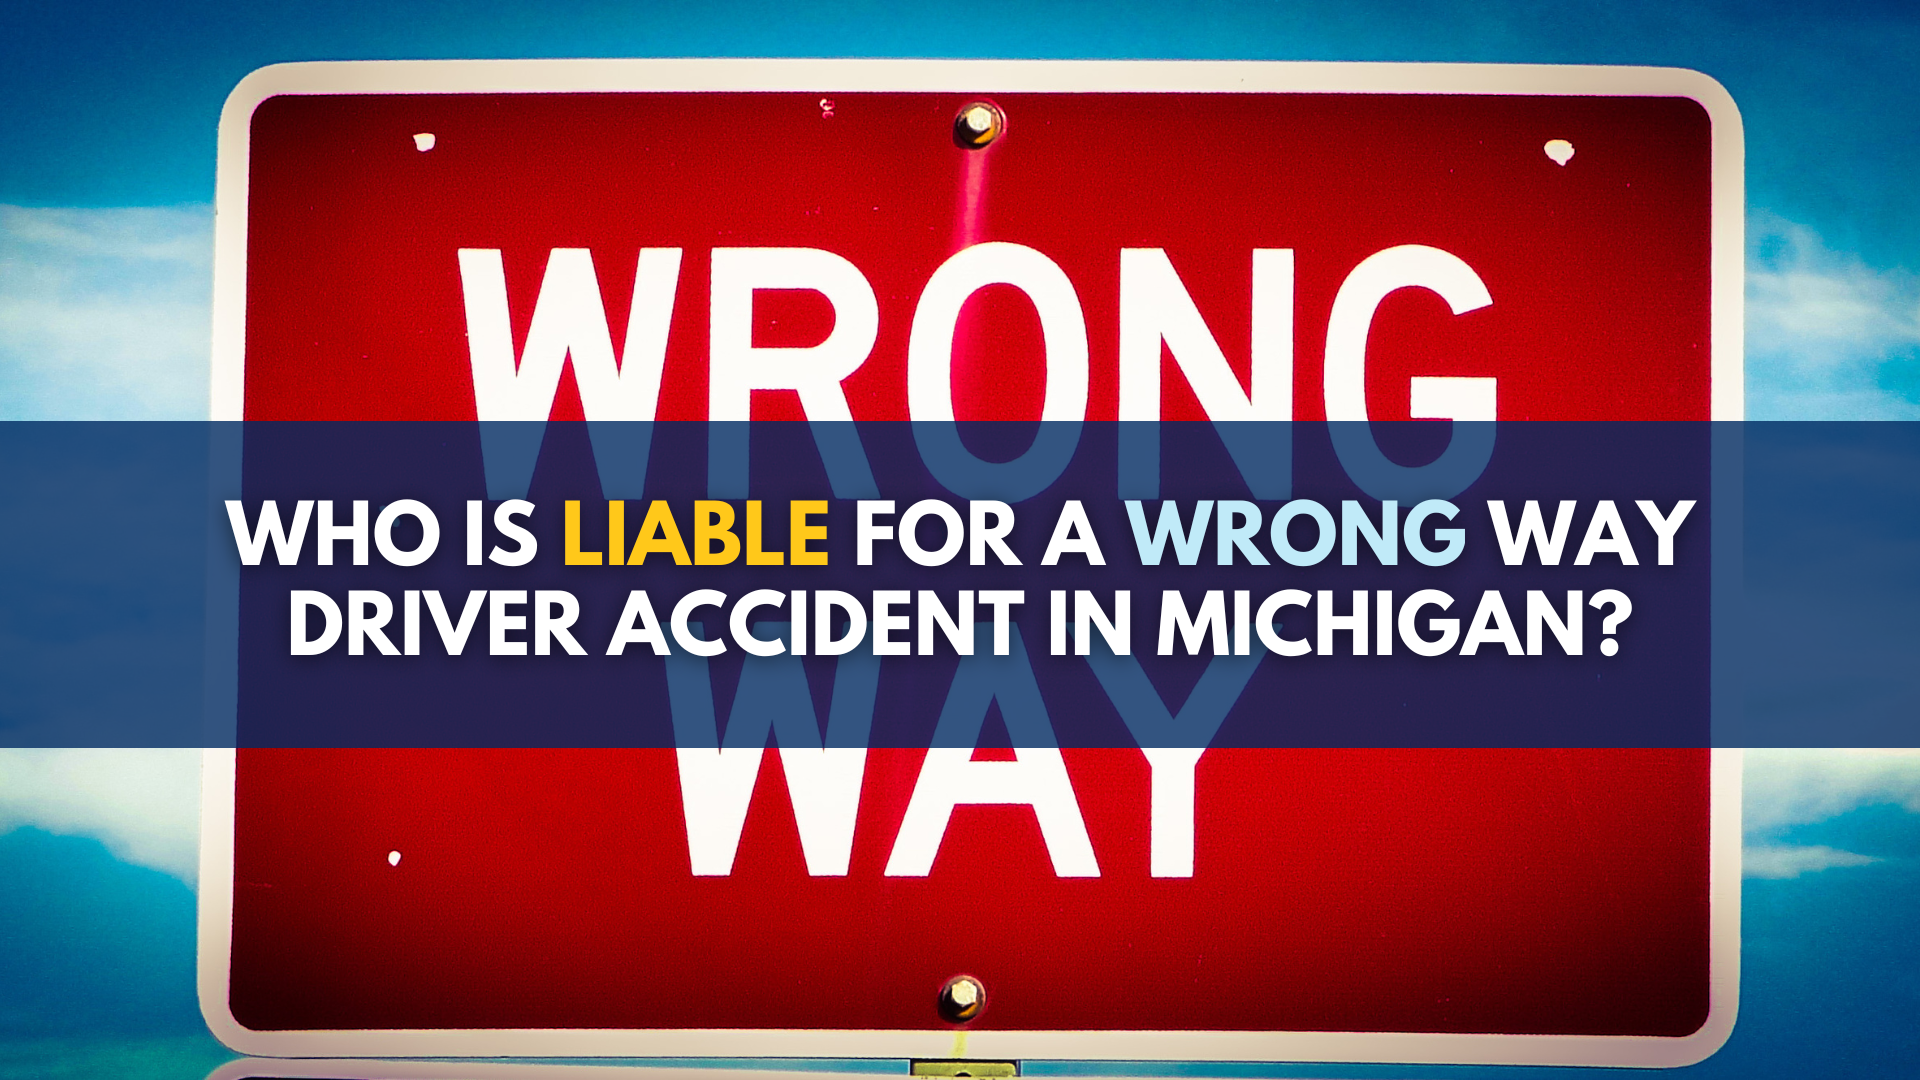 Who is liable for a wrong way driver accident in Michigan?